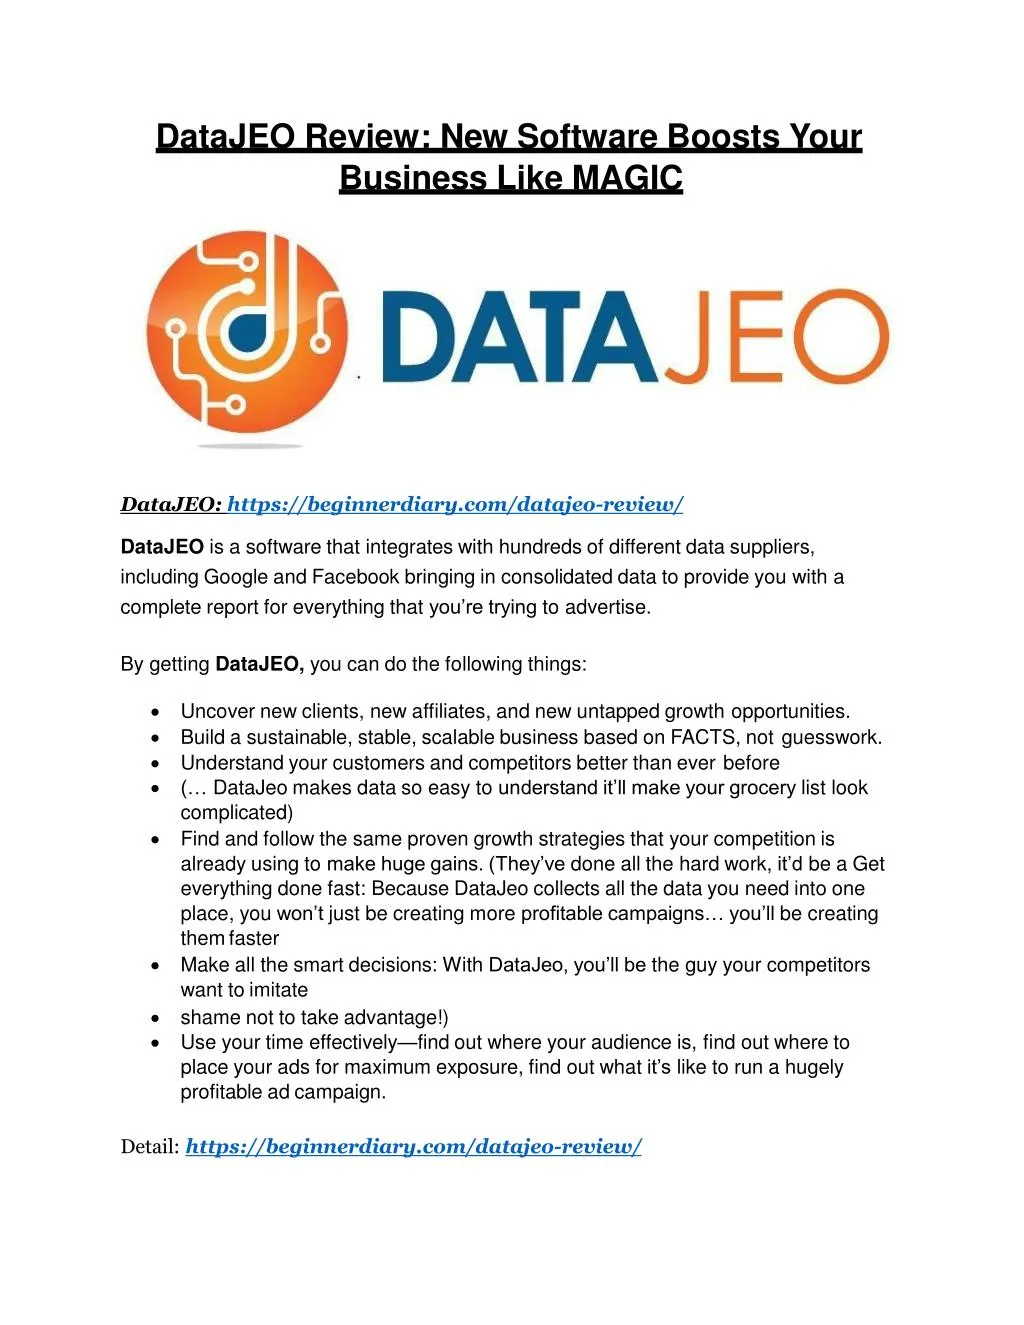 datajeo review new software boosts your business